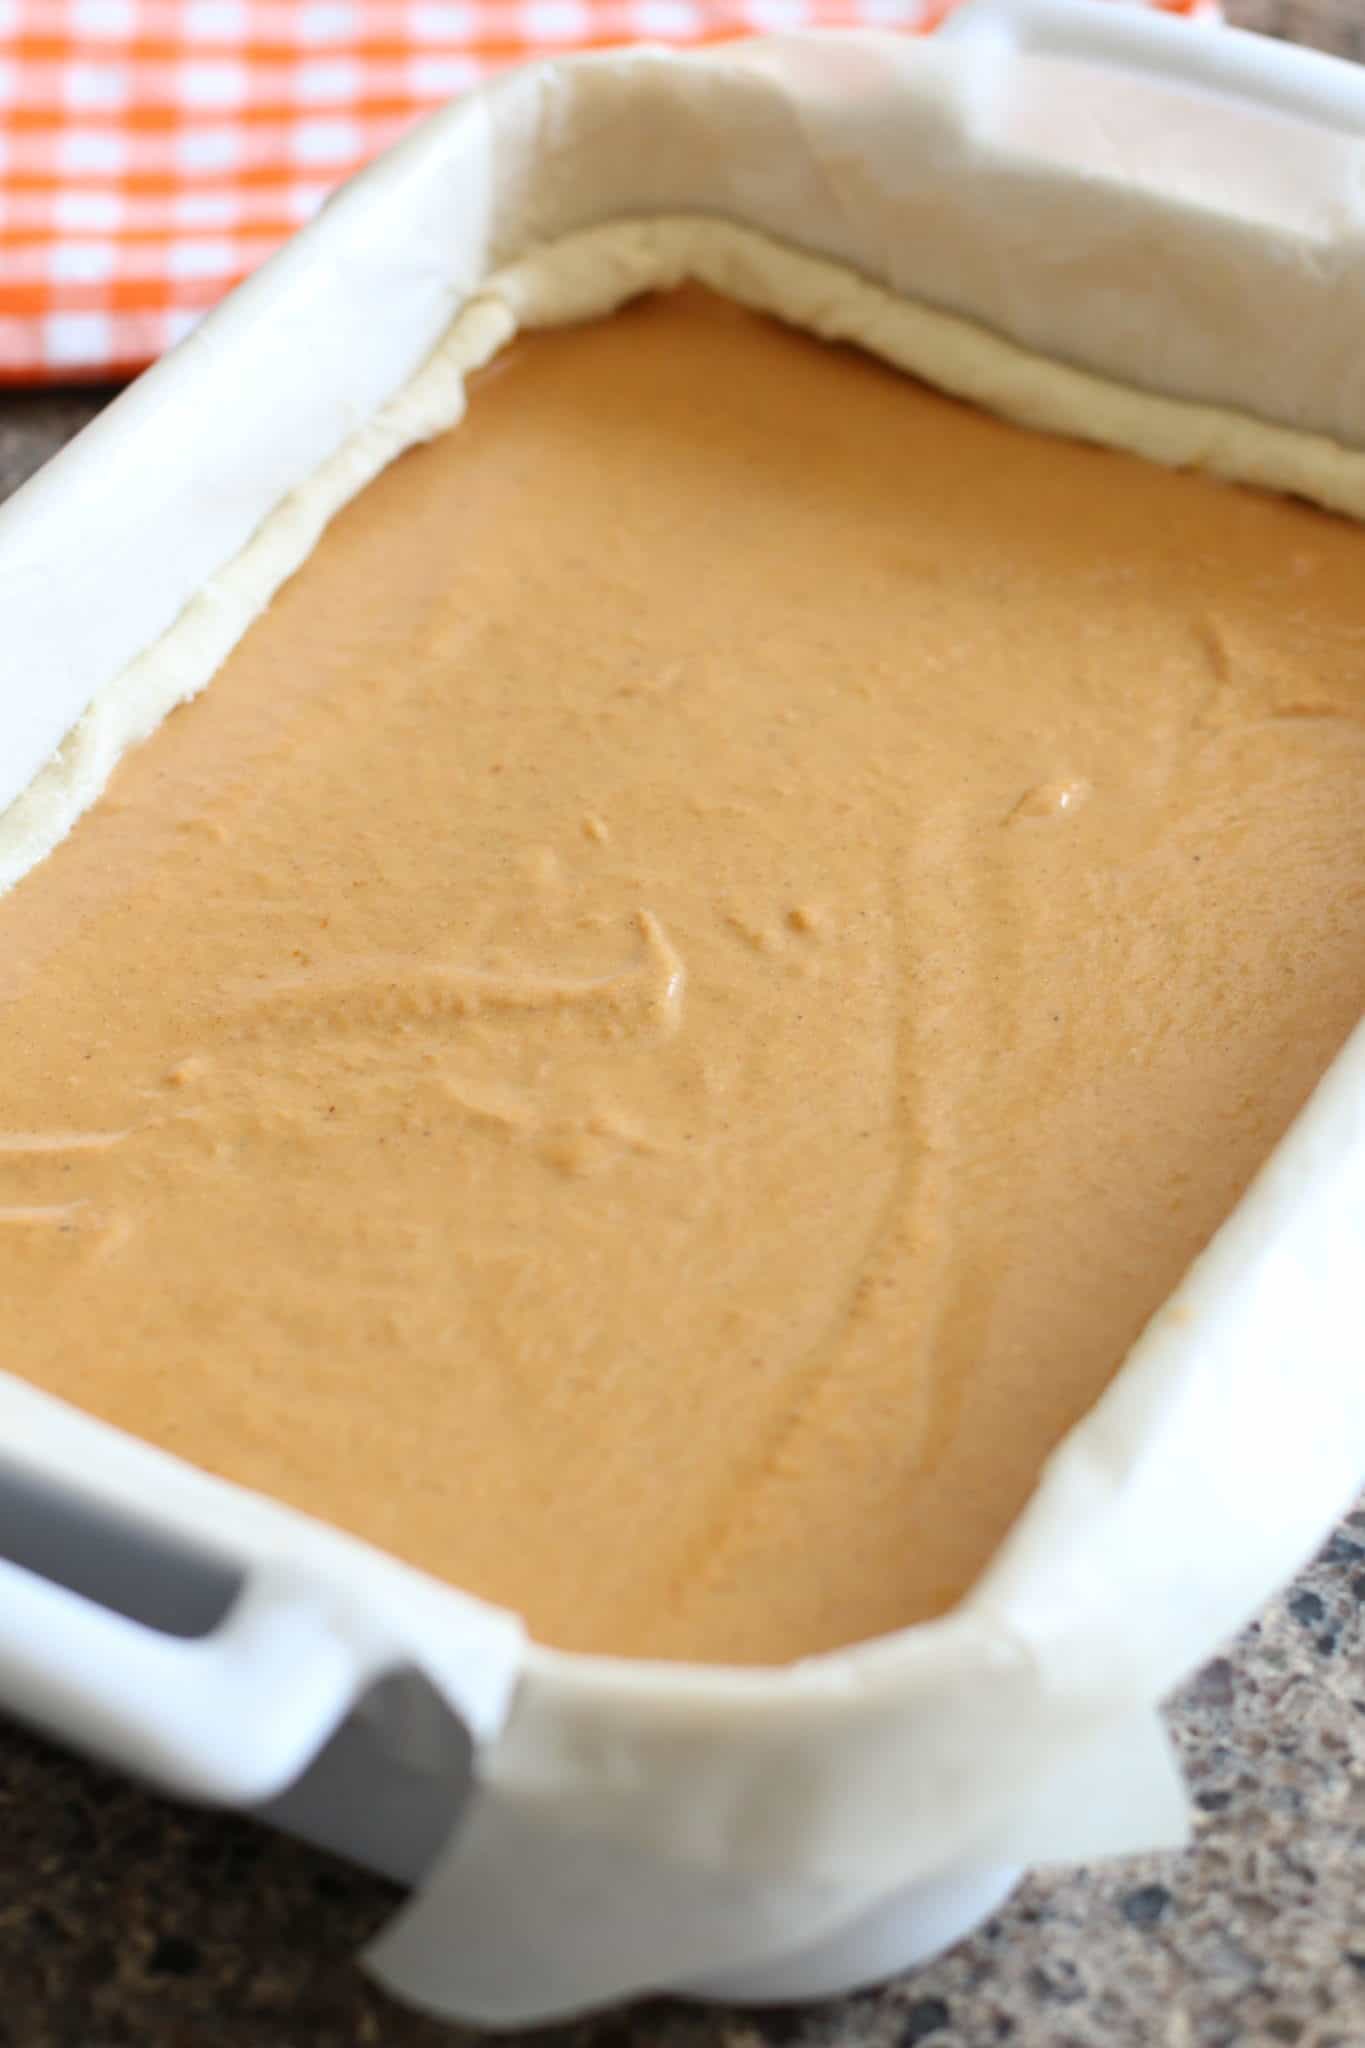 Pumpkin Pie Filling spread into crescent roll dough on top of parchment paper in a Rovel white baking dish.